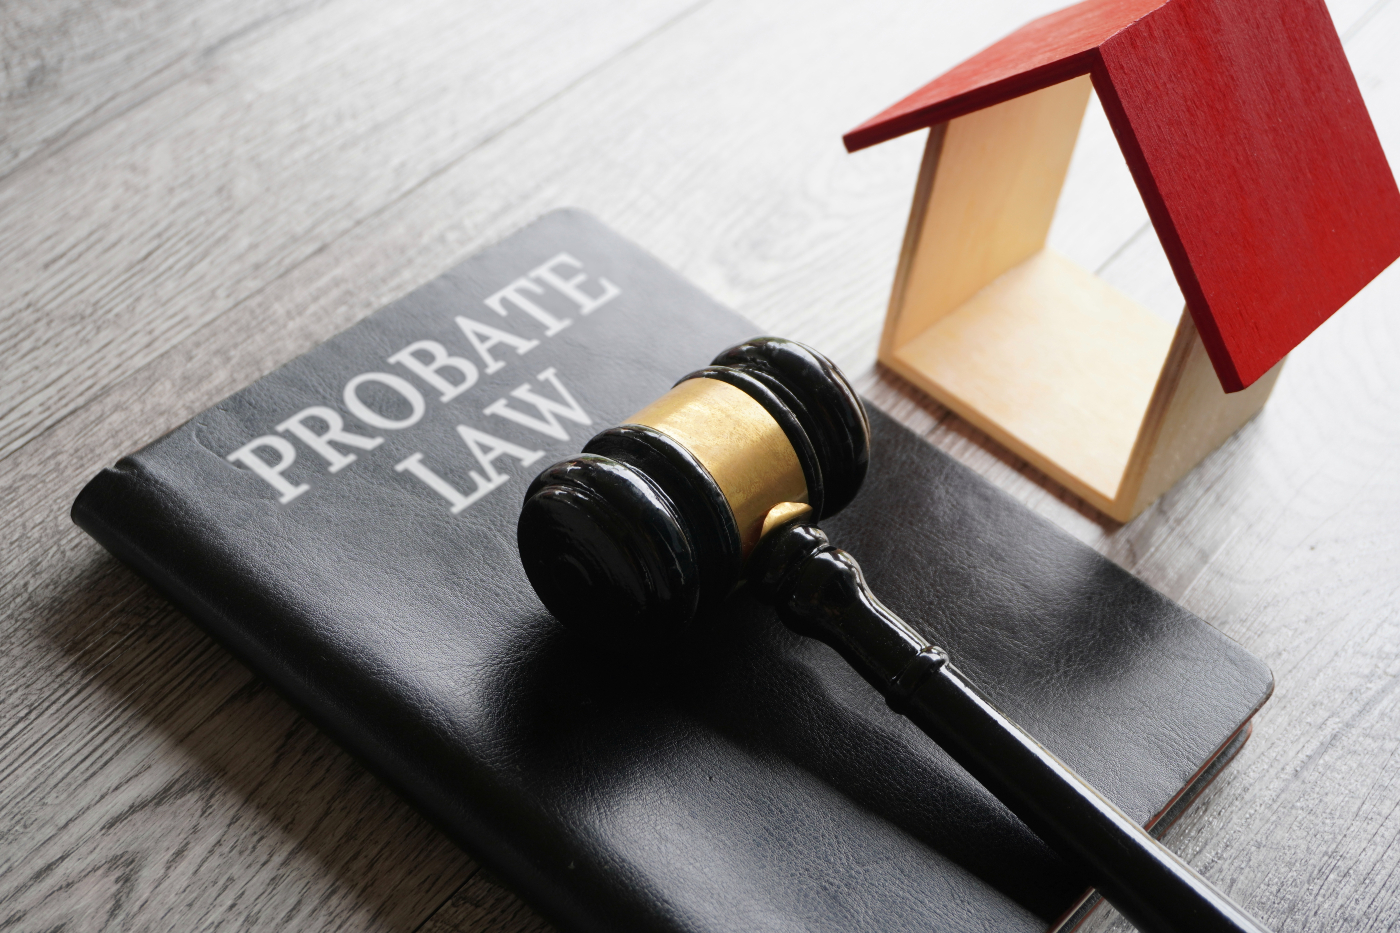 Probate law book with a judge's gavel on top of it